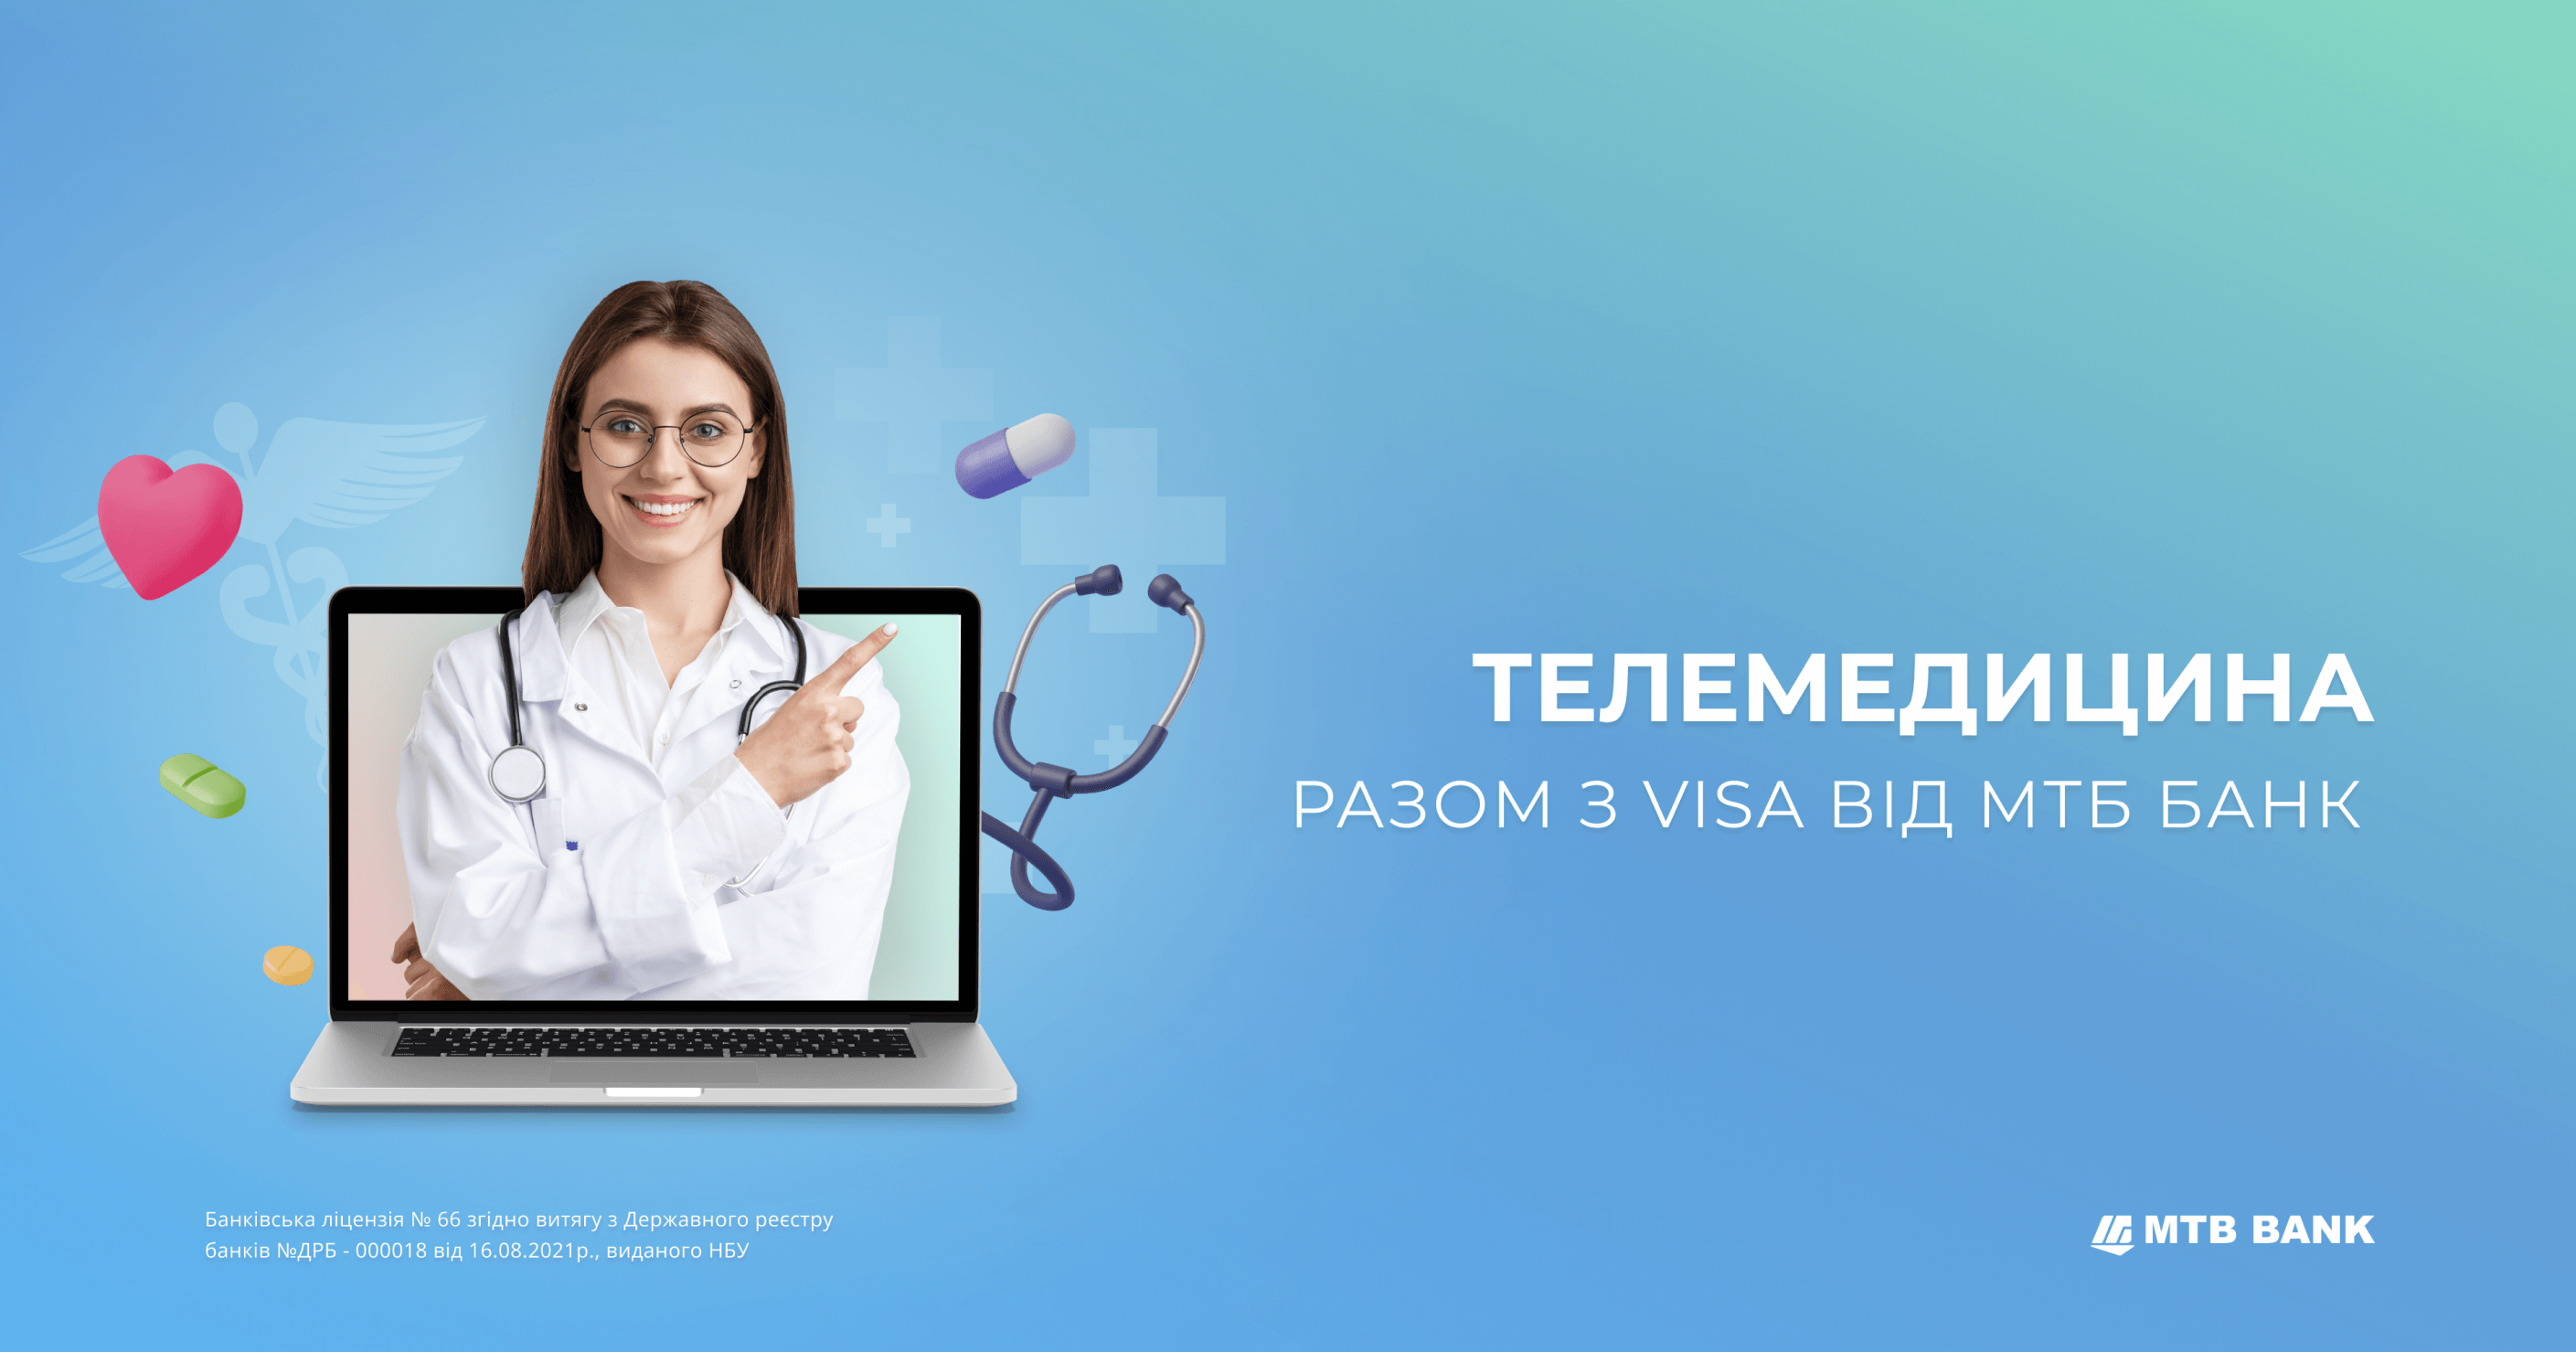 Telemedicine service for holders of Visa cards from MTB BANK - updated! - photo - mtb.ua